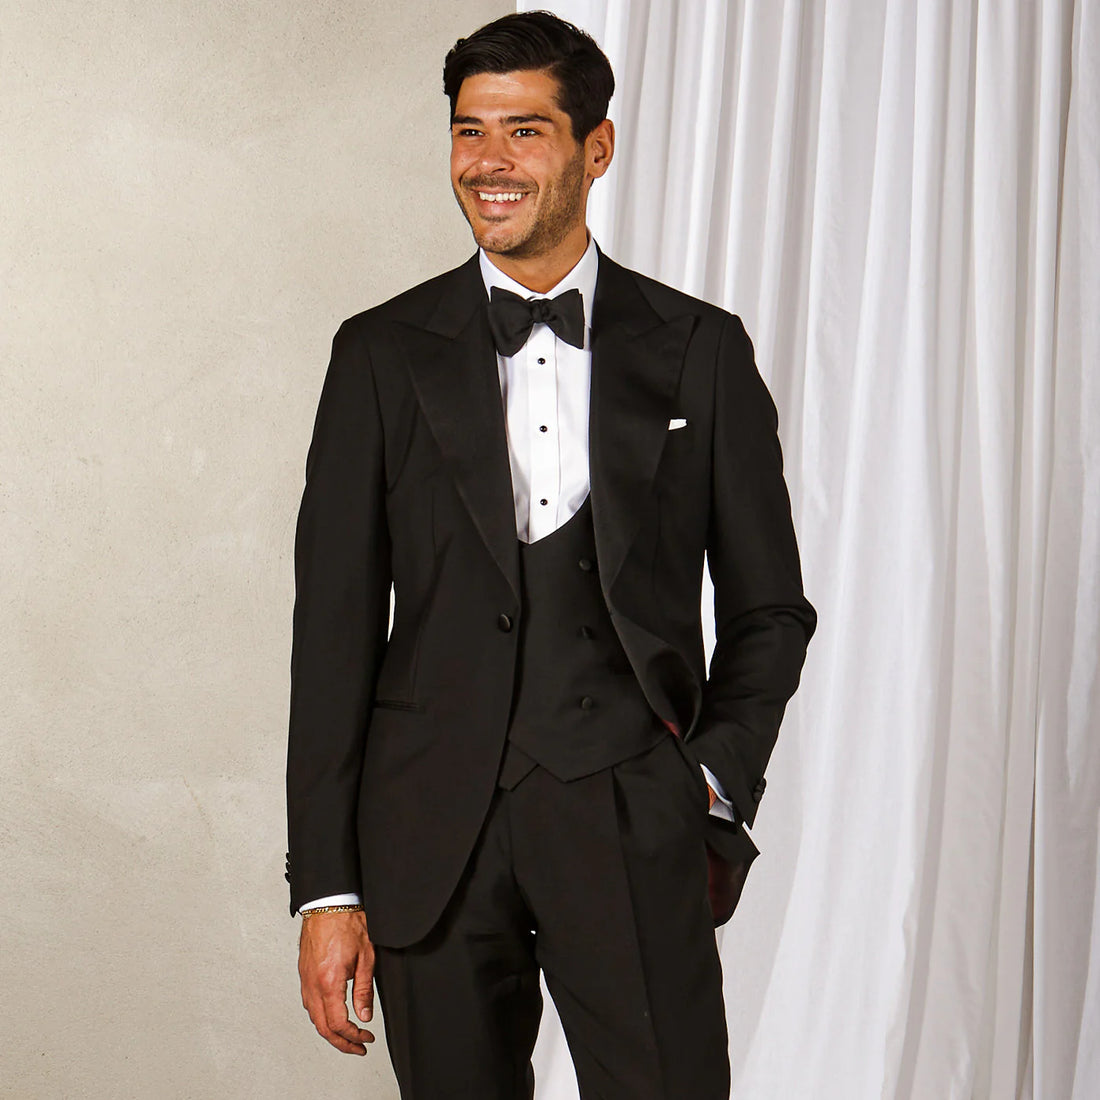 Smiling man in a black tuxedo with a bow tie, standing by a curtain.